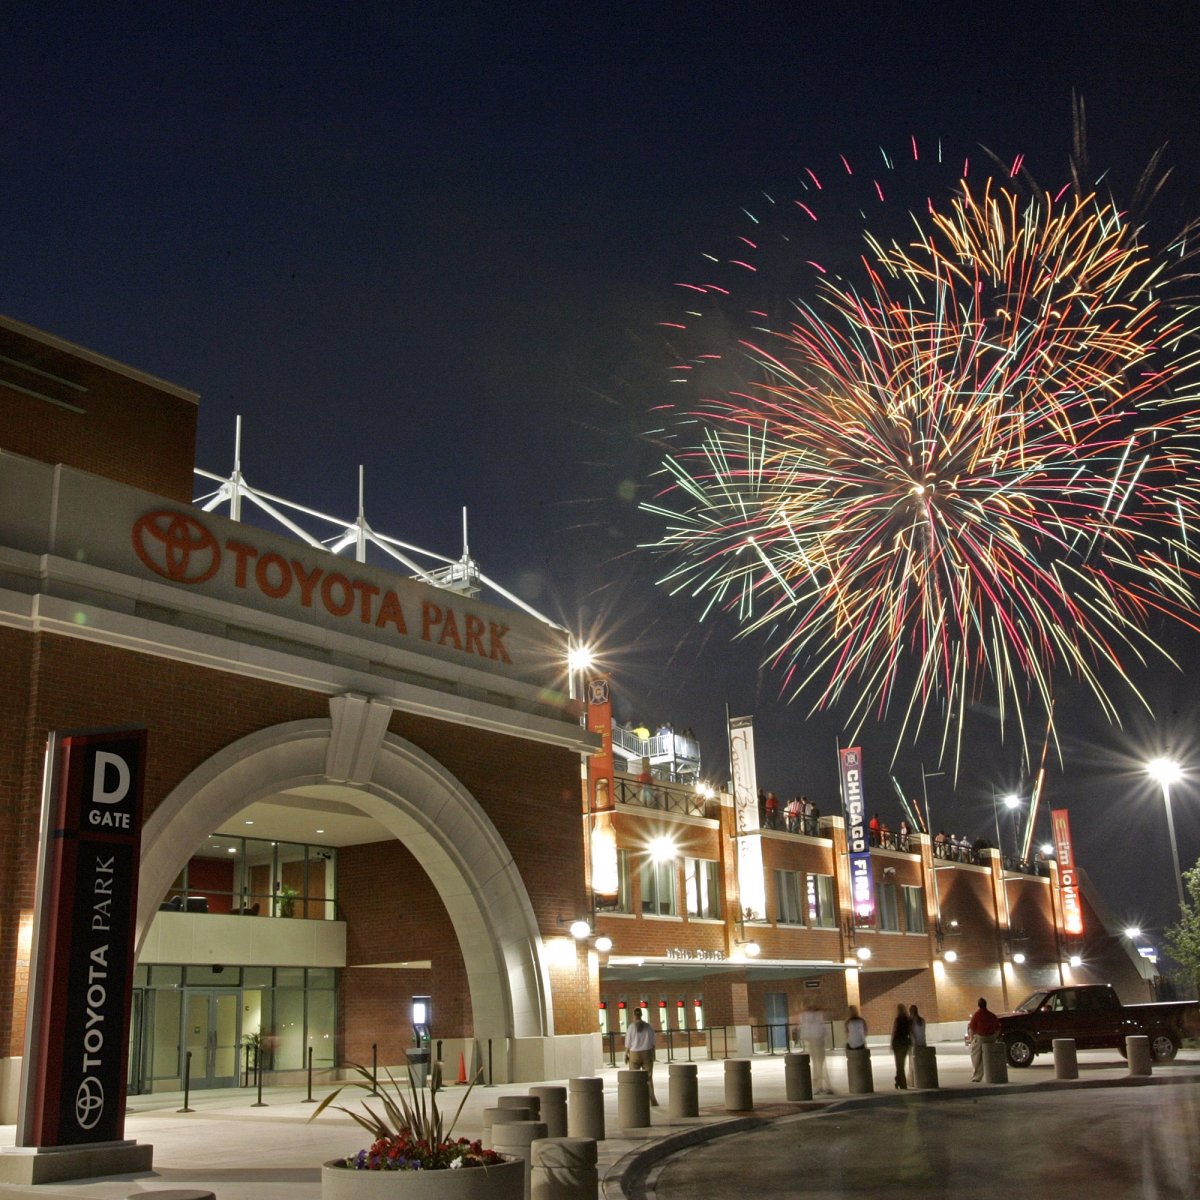 Exterior image of Toyota Park at night with fireworks behind it